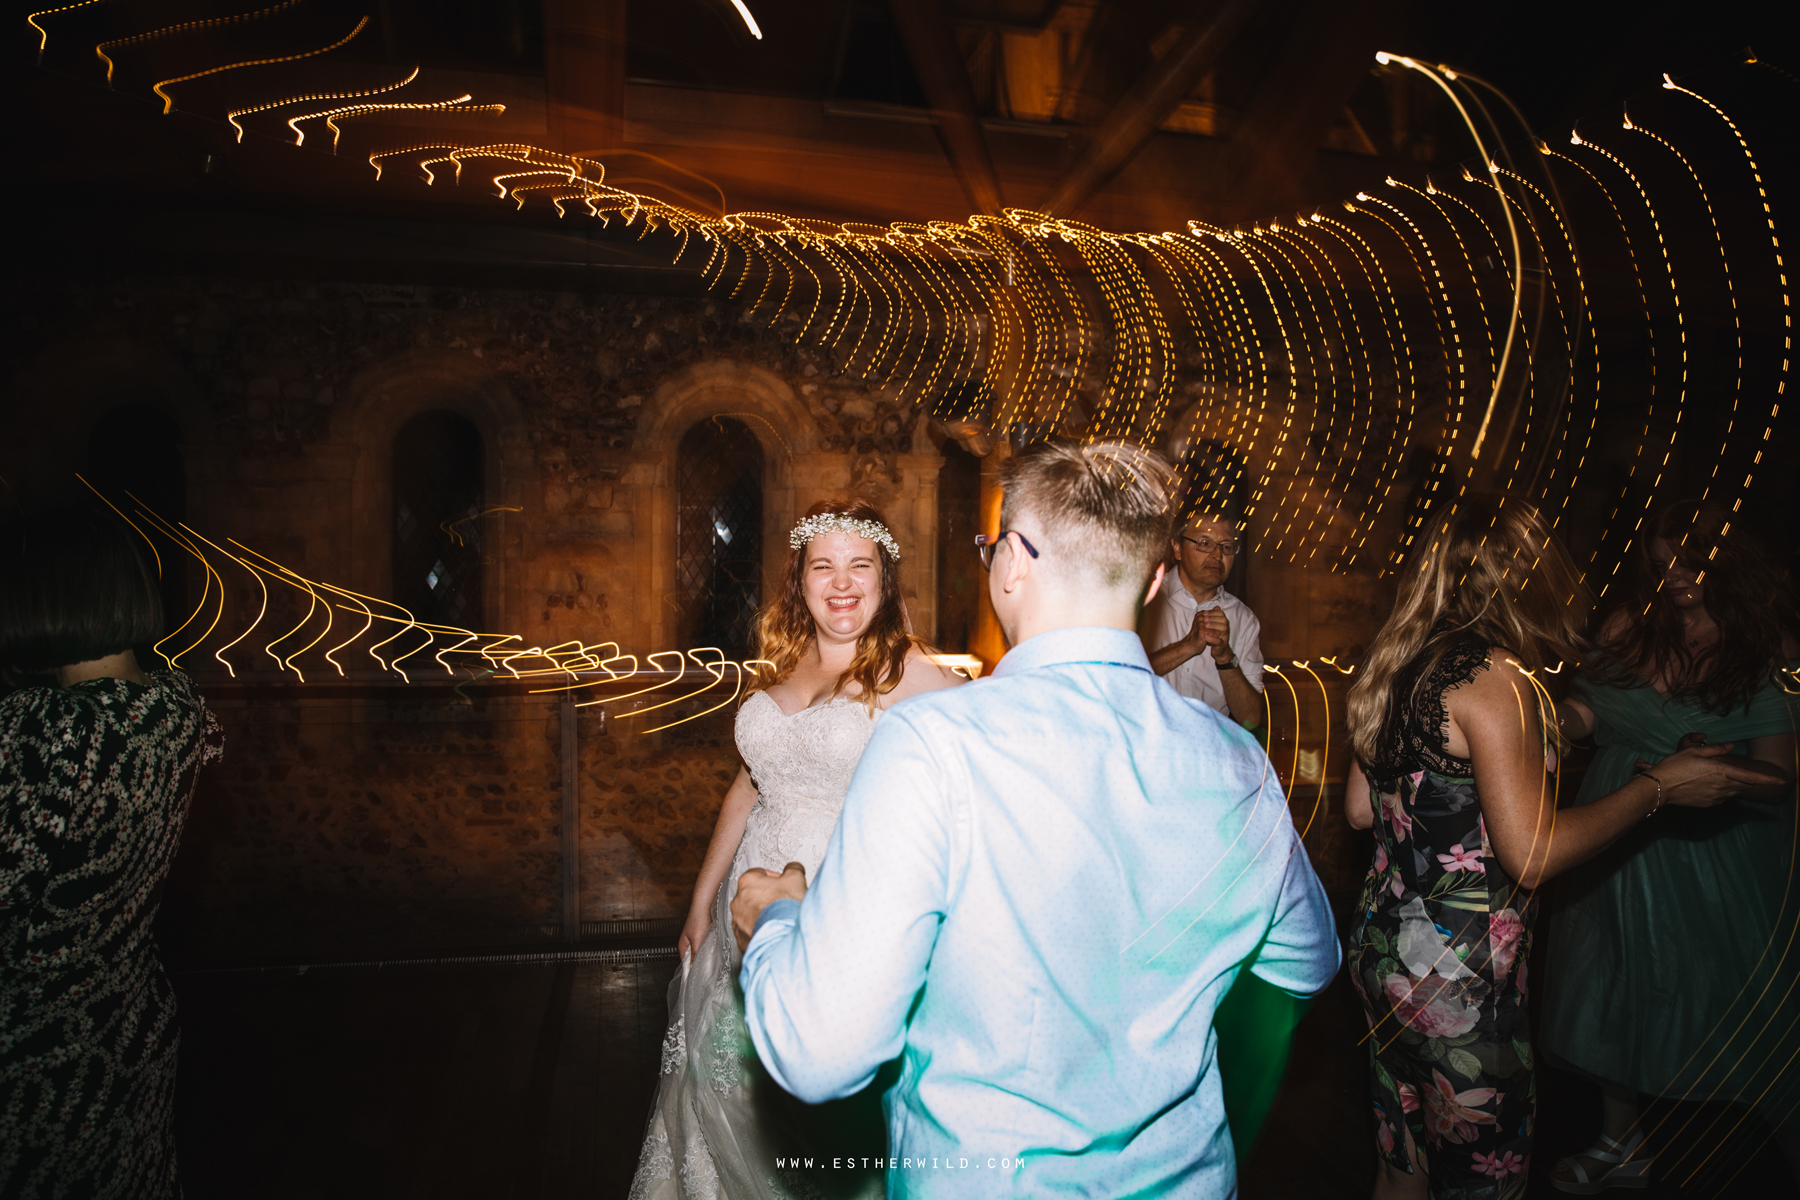 Norwich_Castle_Arcade_Grosvenor_Chip_Birdcage_Cathedral_Cloisters_Refectory_Wedding_Photography_Esther_Wild_Photographer_Norfolk_Kings_Lynn_3R8A3432.jpg